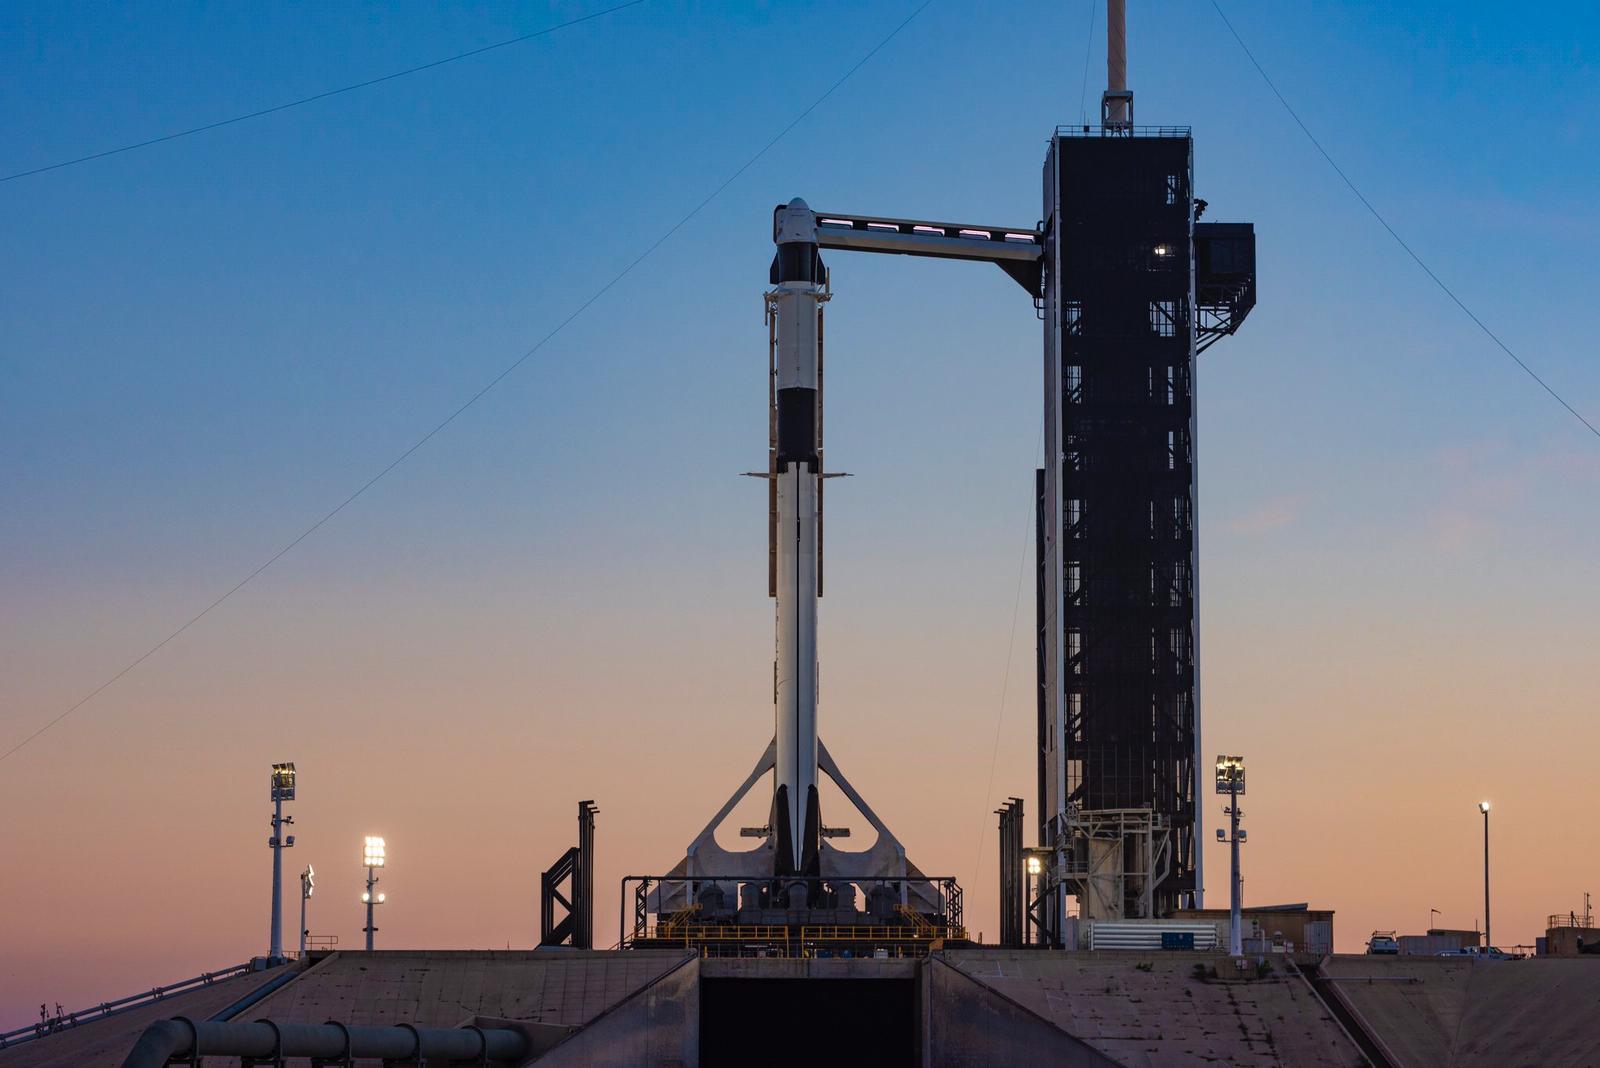 UPDATE 1-Bad weather forces delay of SpaceX simulated rocket failure test